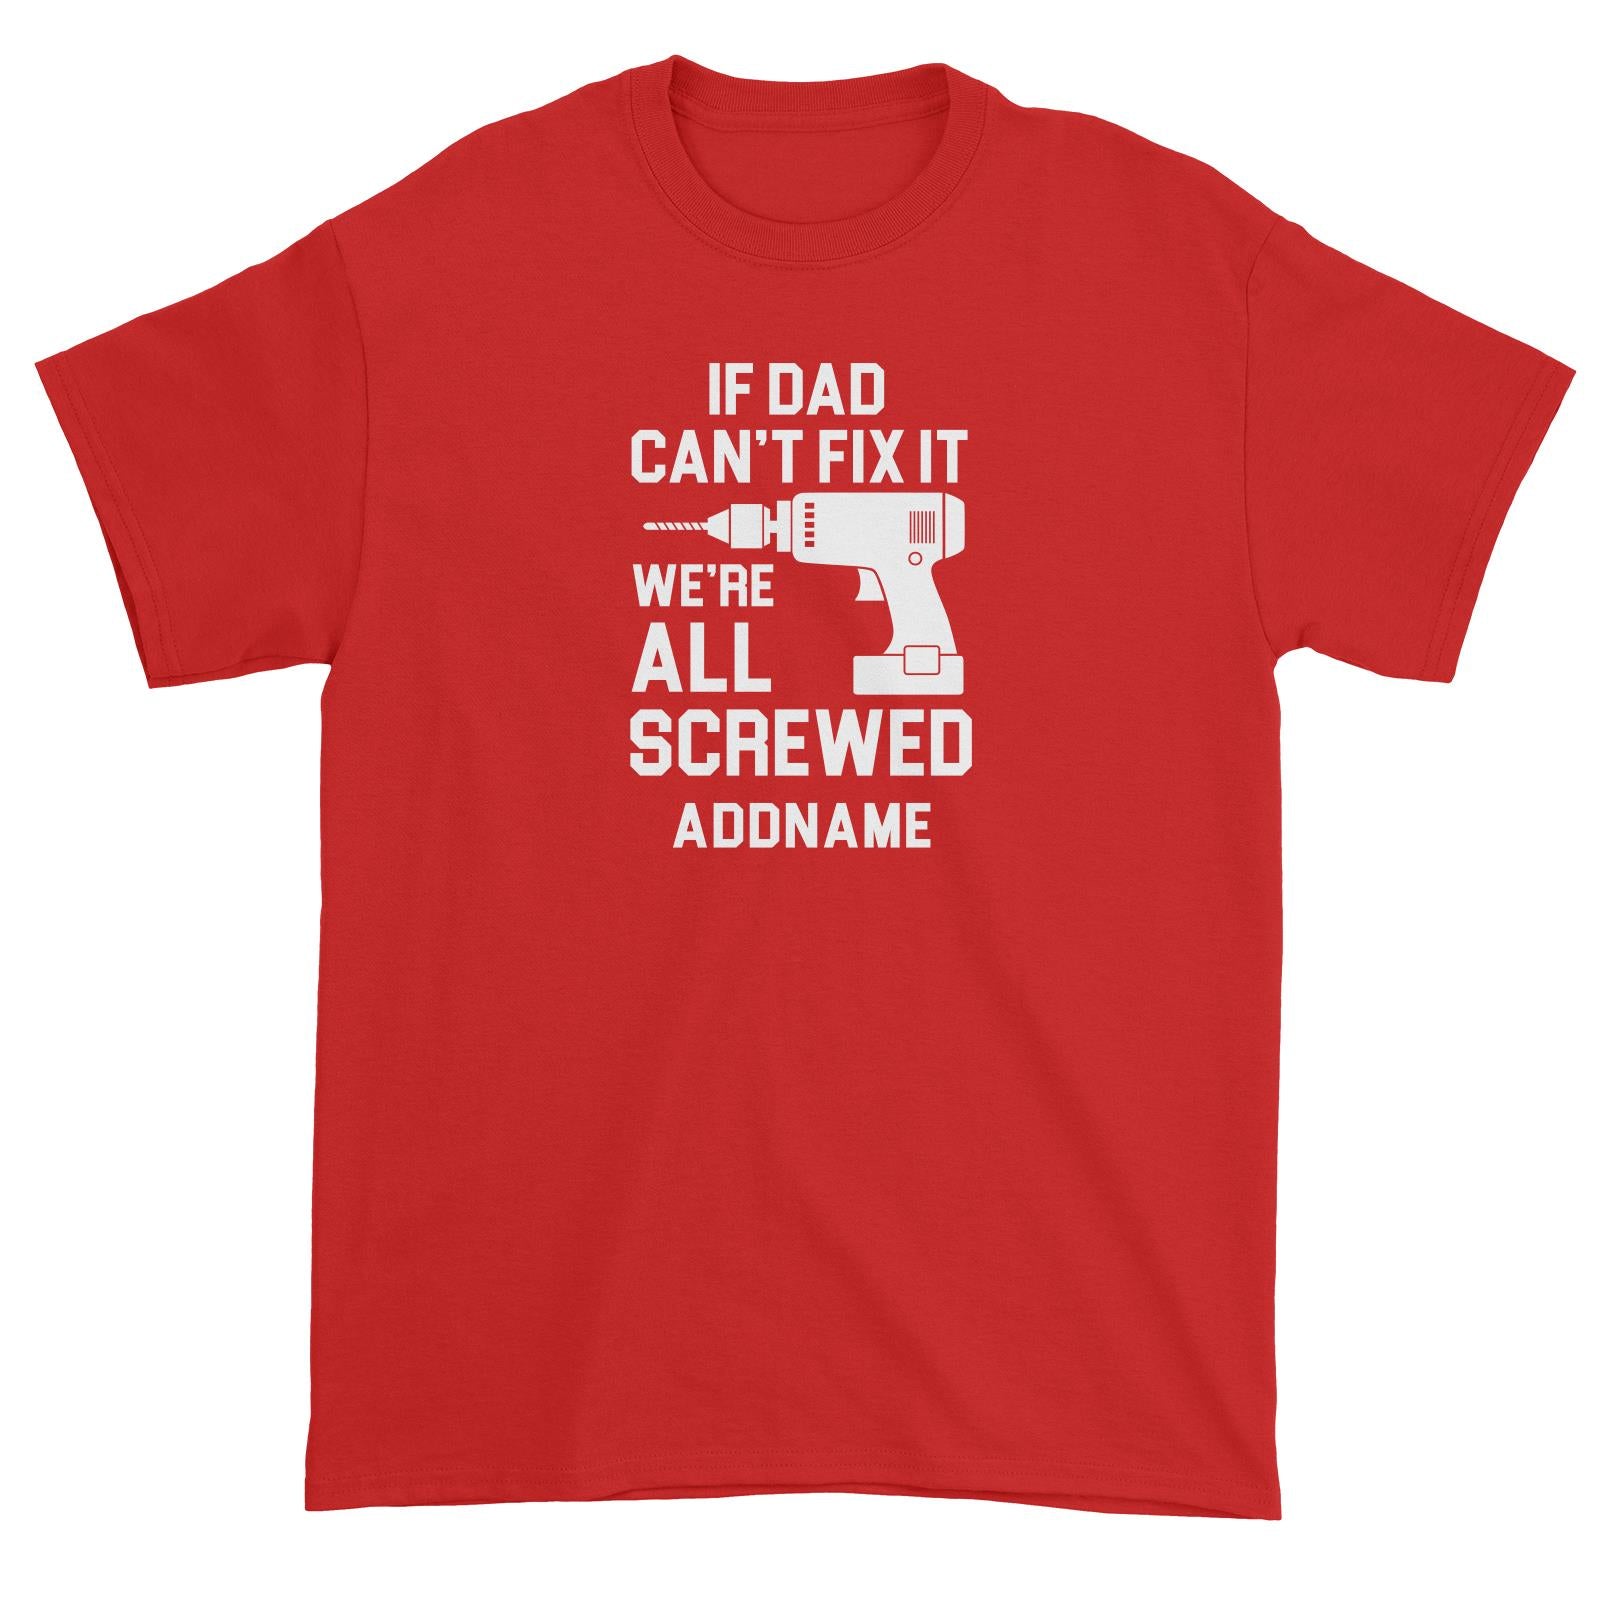 If Dad Can't Fix It We're All Screwed Addname Unisex T-Shirt